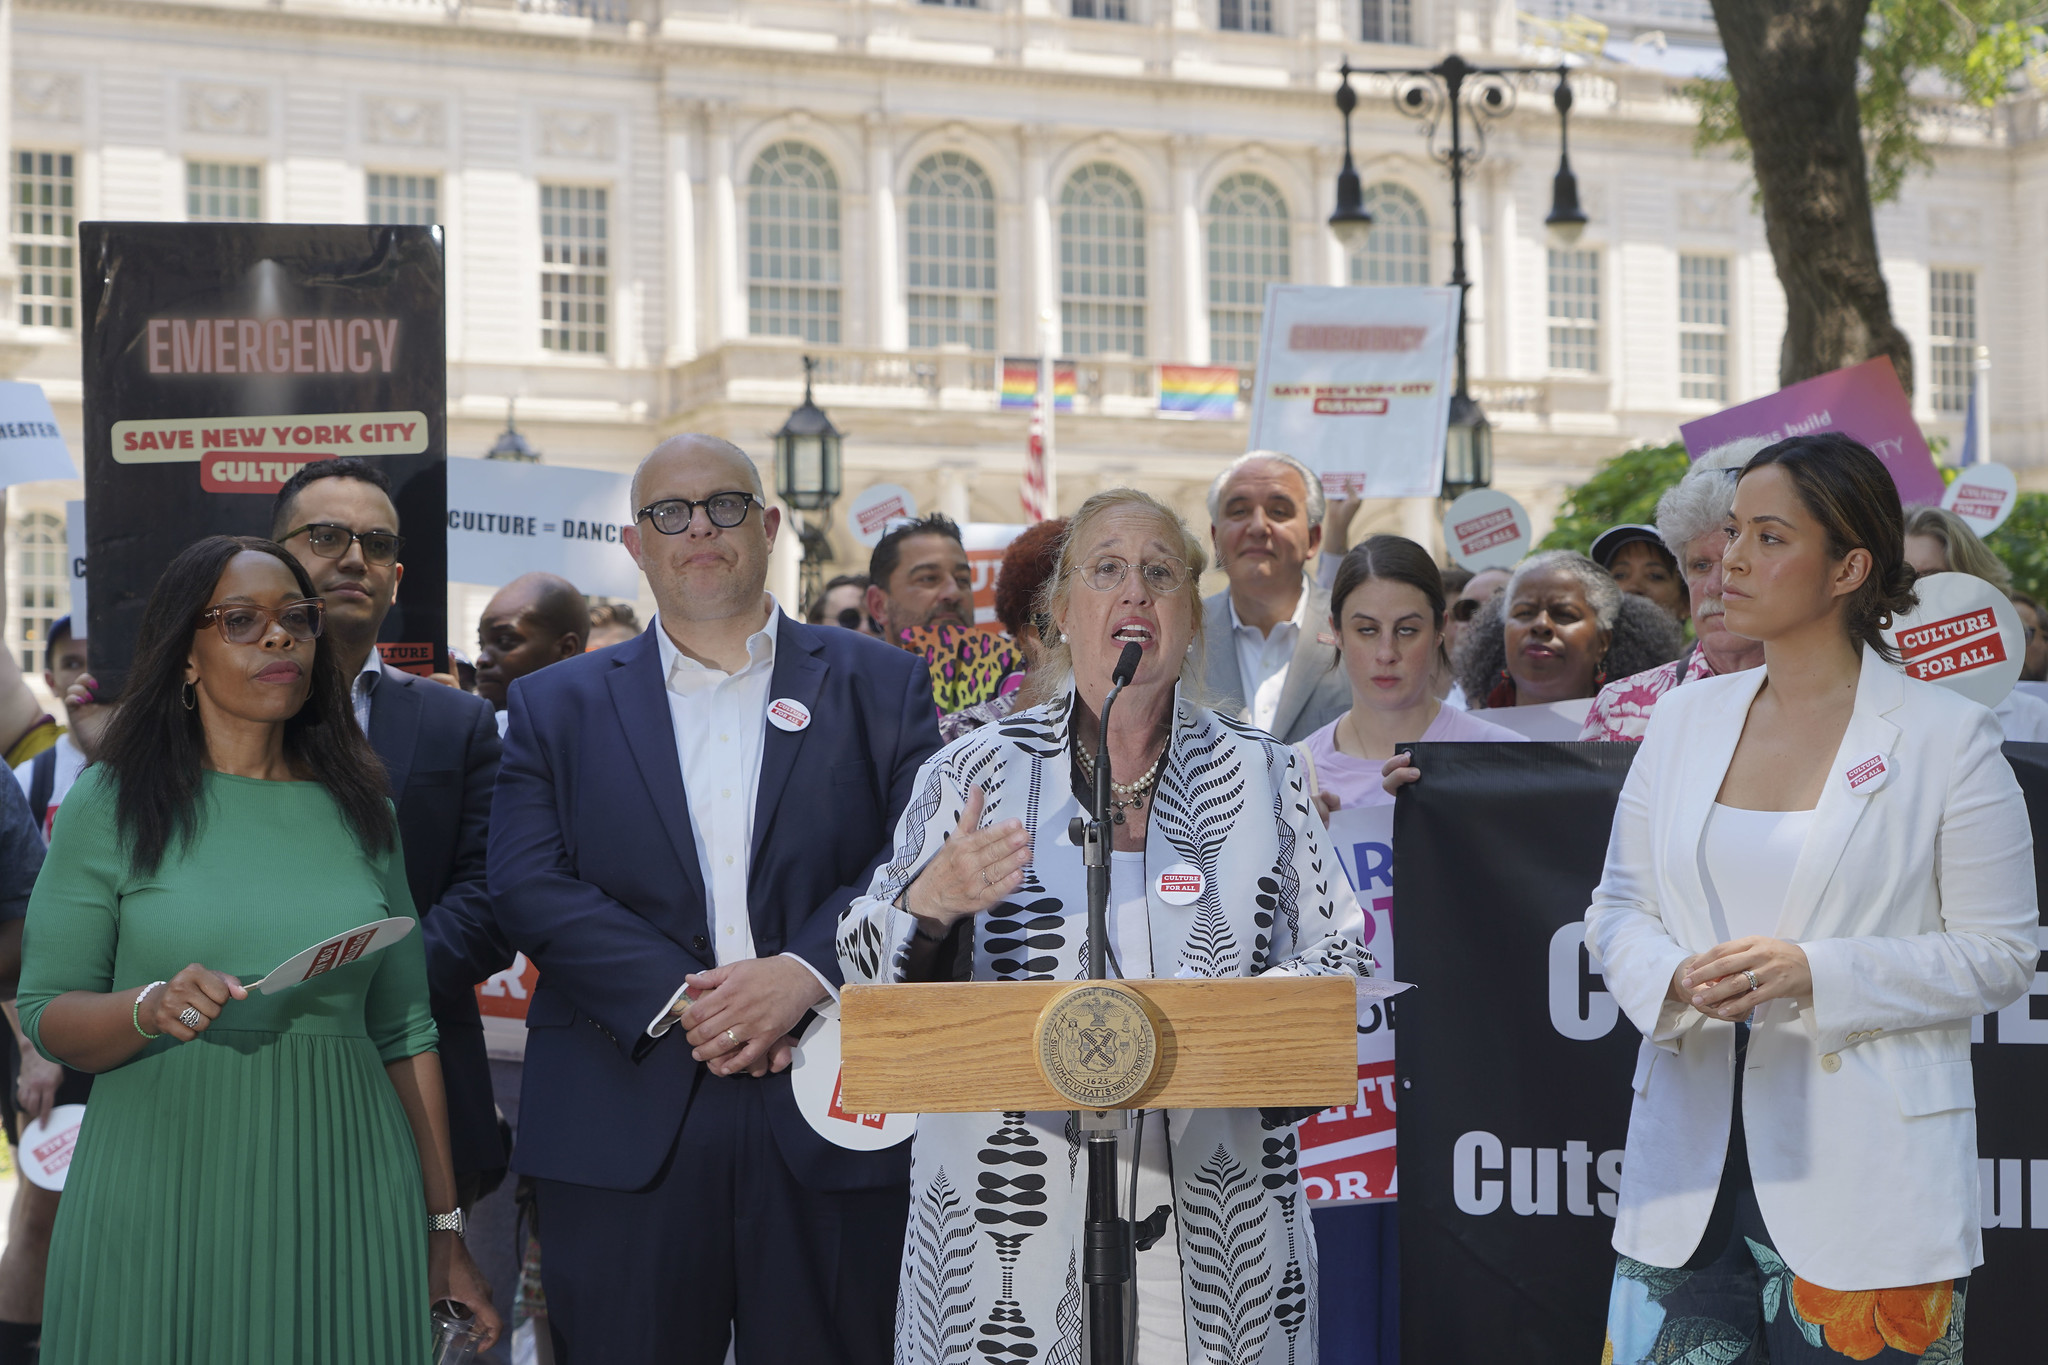 NYC Council Call on Mayor Adams to Support Restoration of $53 Million in Budget Cuts for Arts and Culture